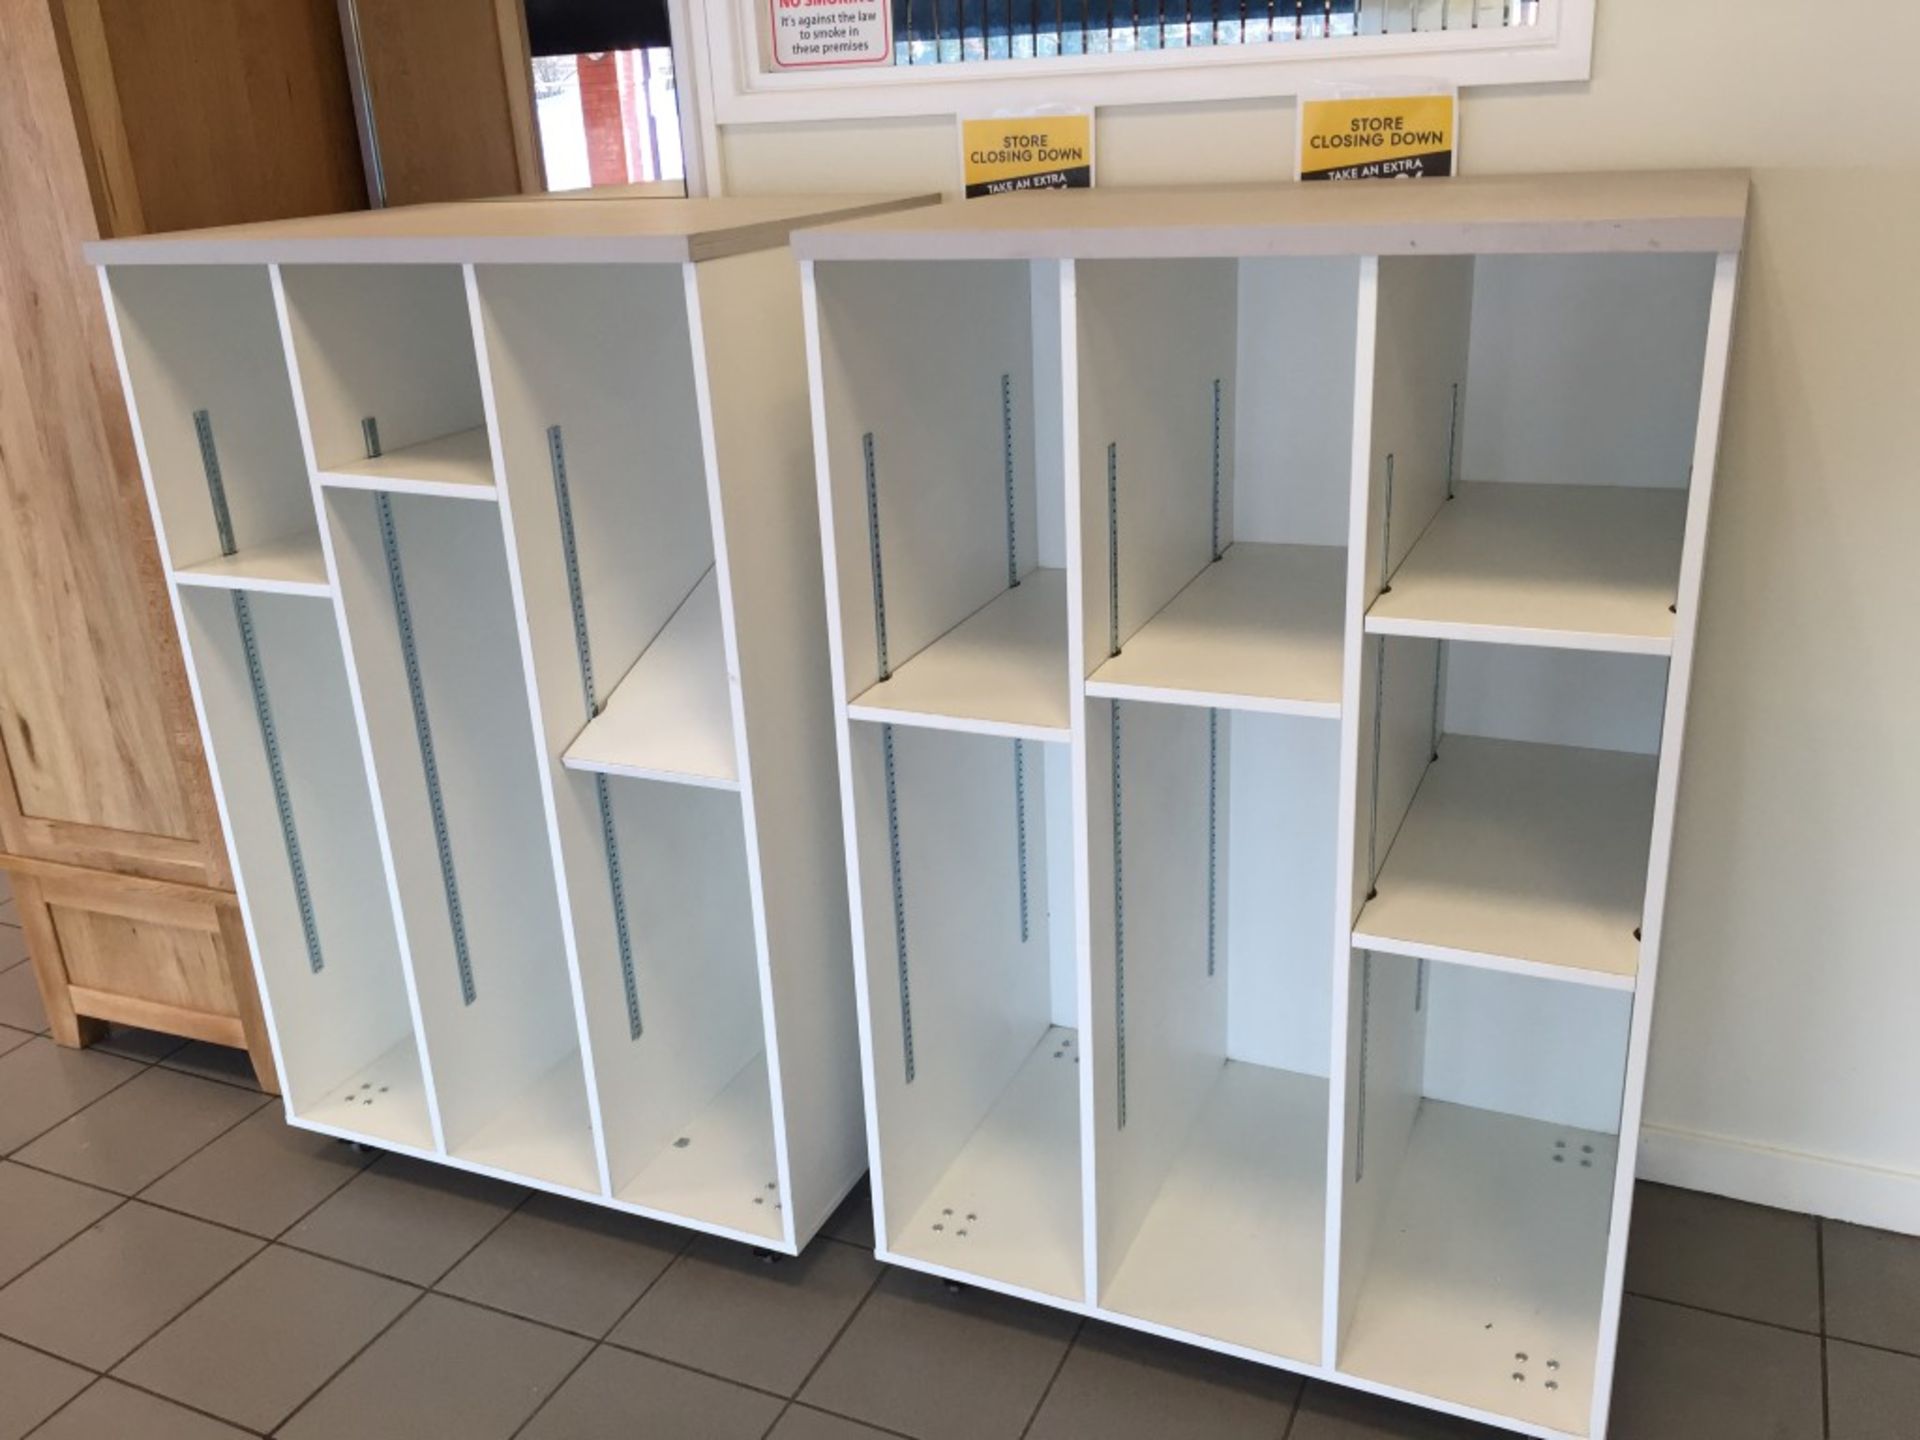 2 x Substantial Mobile Floor Display Cabinets with adjustable height shelving - Wheels under have